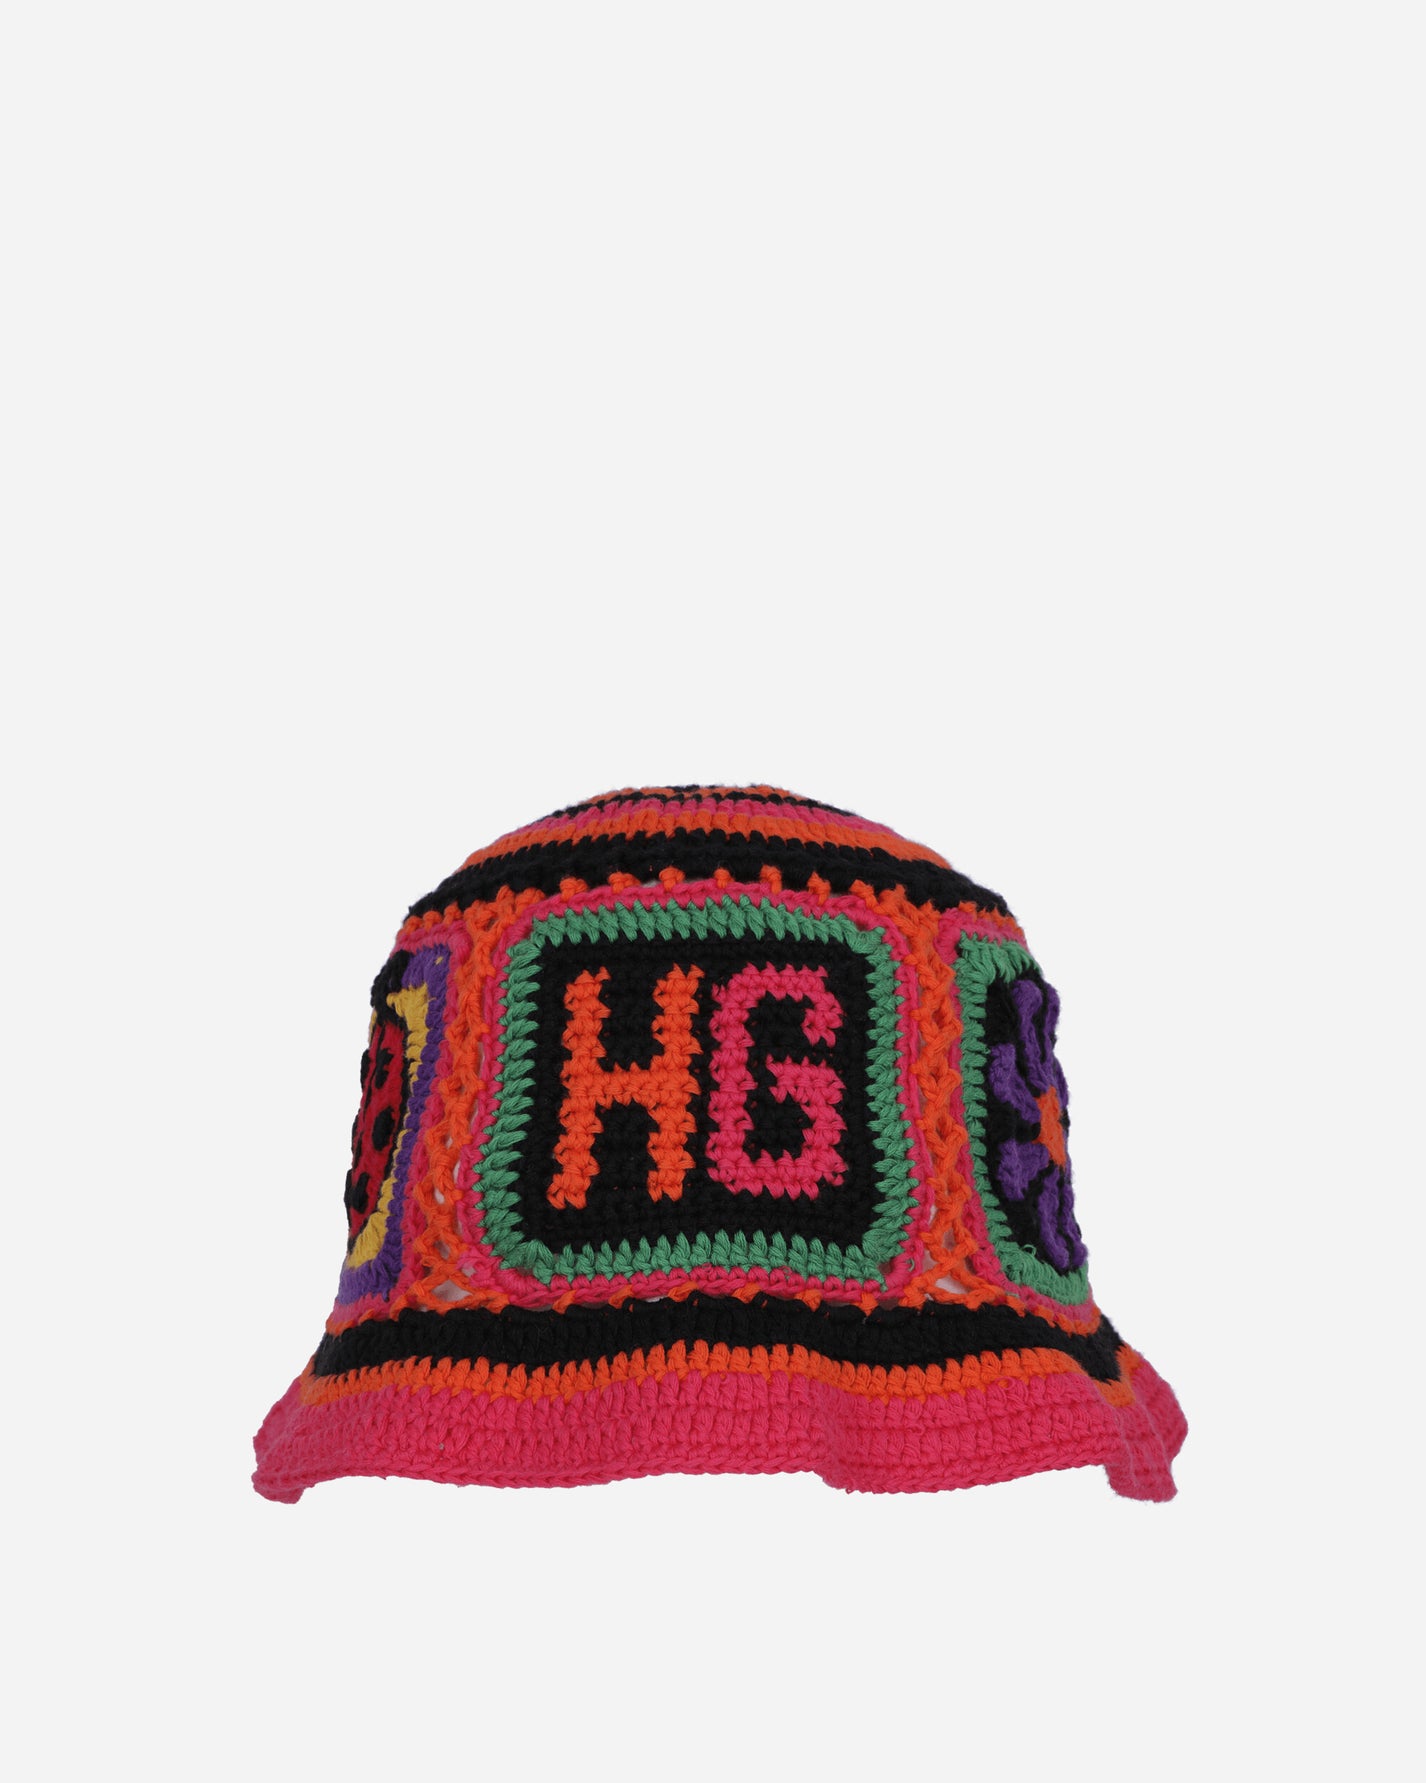 Hysteric Glamour Wmns Hg Square Black Hats Bucket 01241CH019 C1